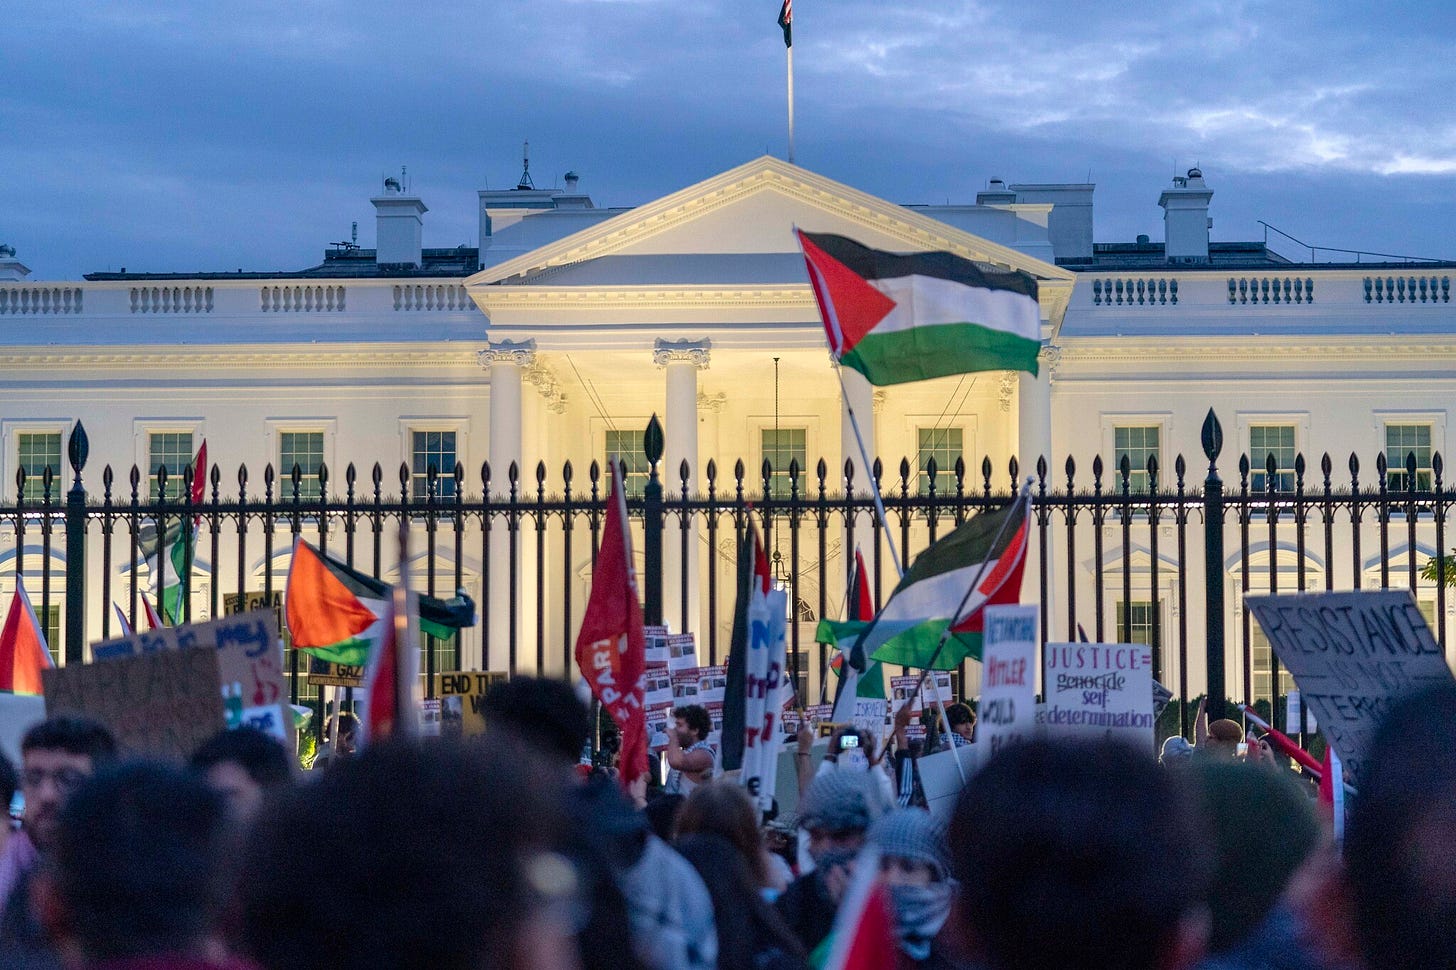 Security upped at White House ahead of rally against Israel for responding  to Oct. 7 | The Times of Israel